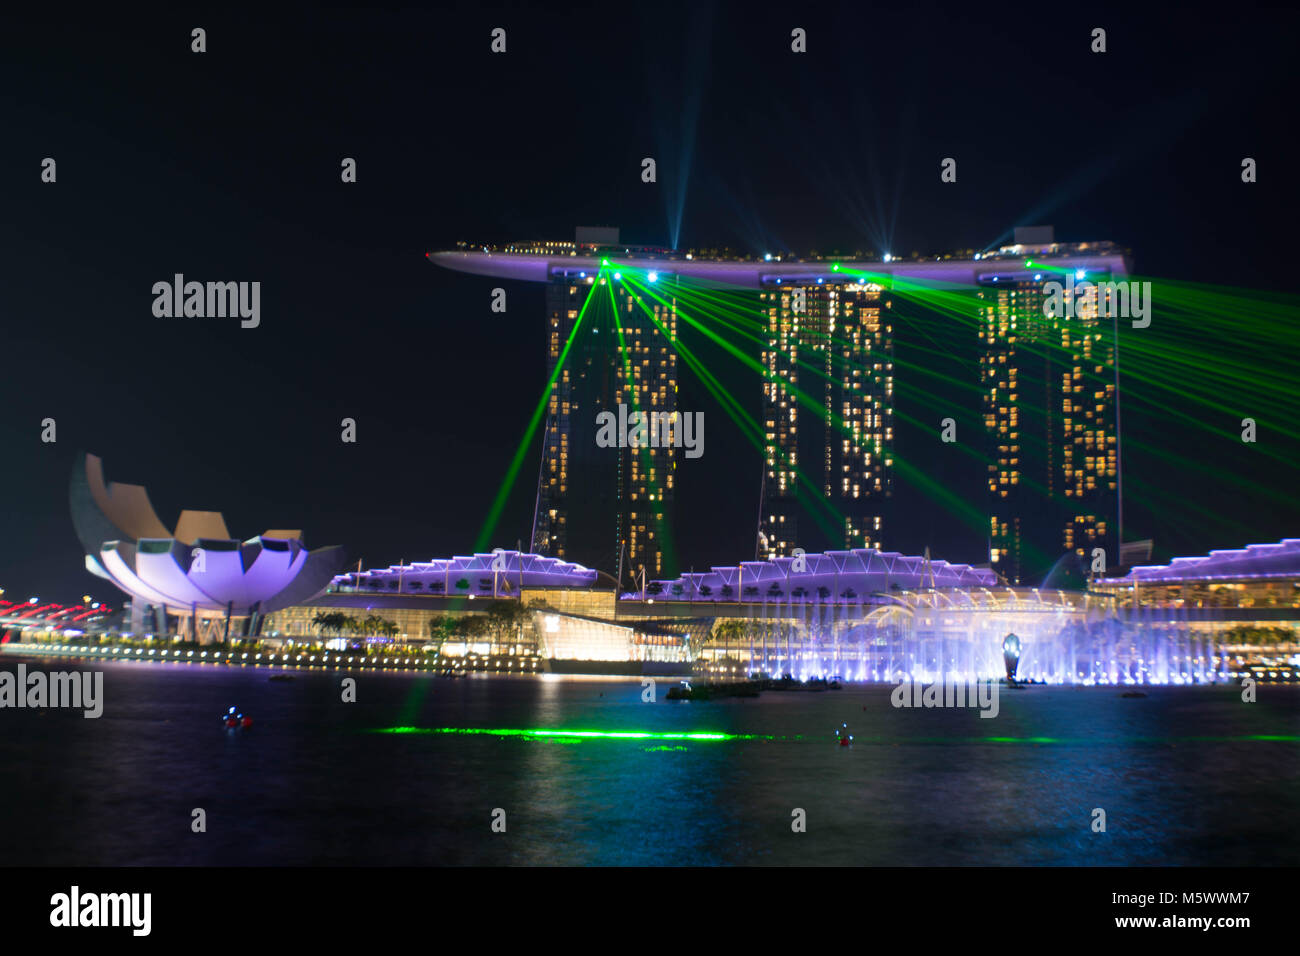 The famous Marina Bay Sands hotel during its light show with its reflecting on the Singapore river in the marina in Singapore at night. Stock Photo